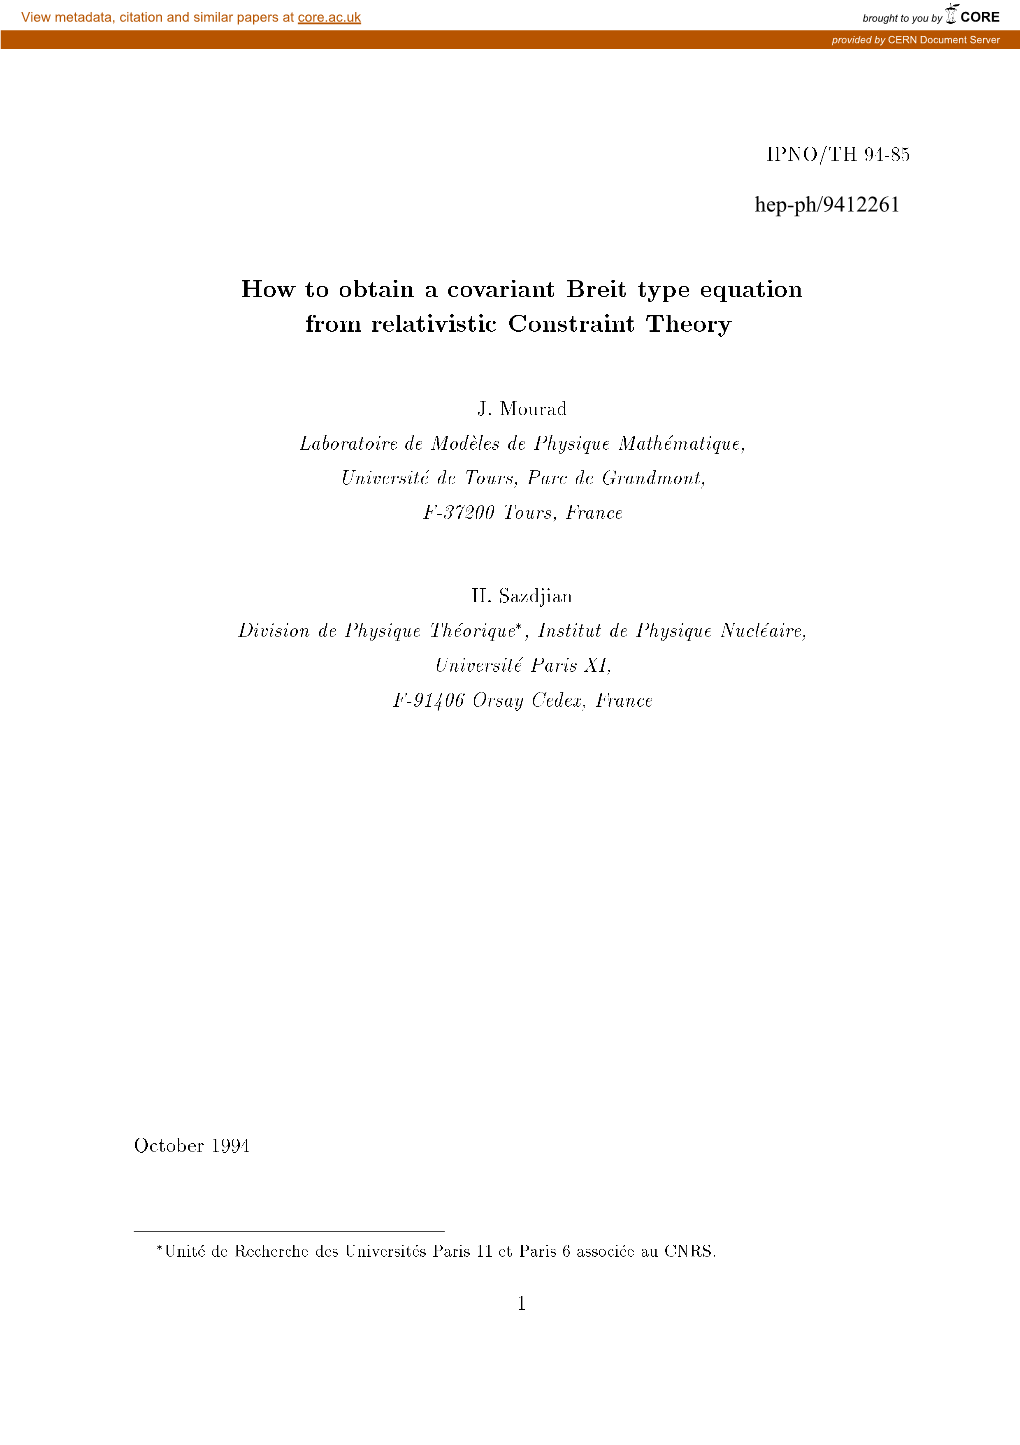 How to Obtain a Covariant Breit Type Equation from Relativistic Constraint Theory